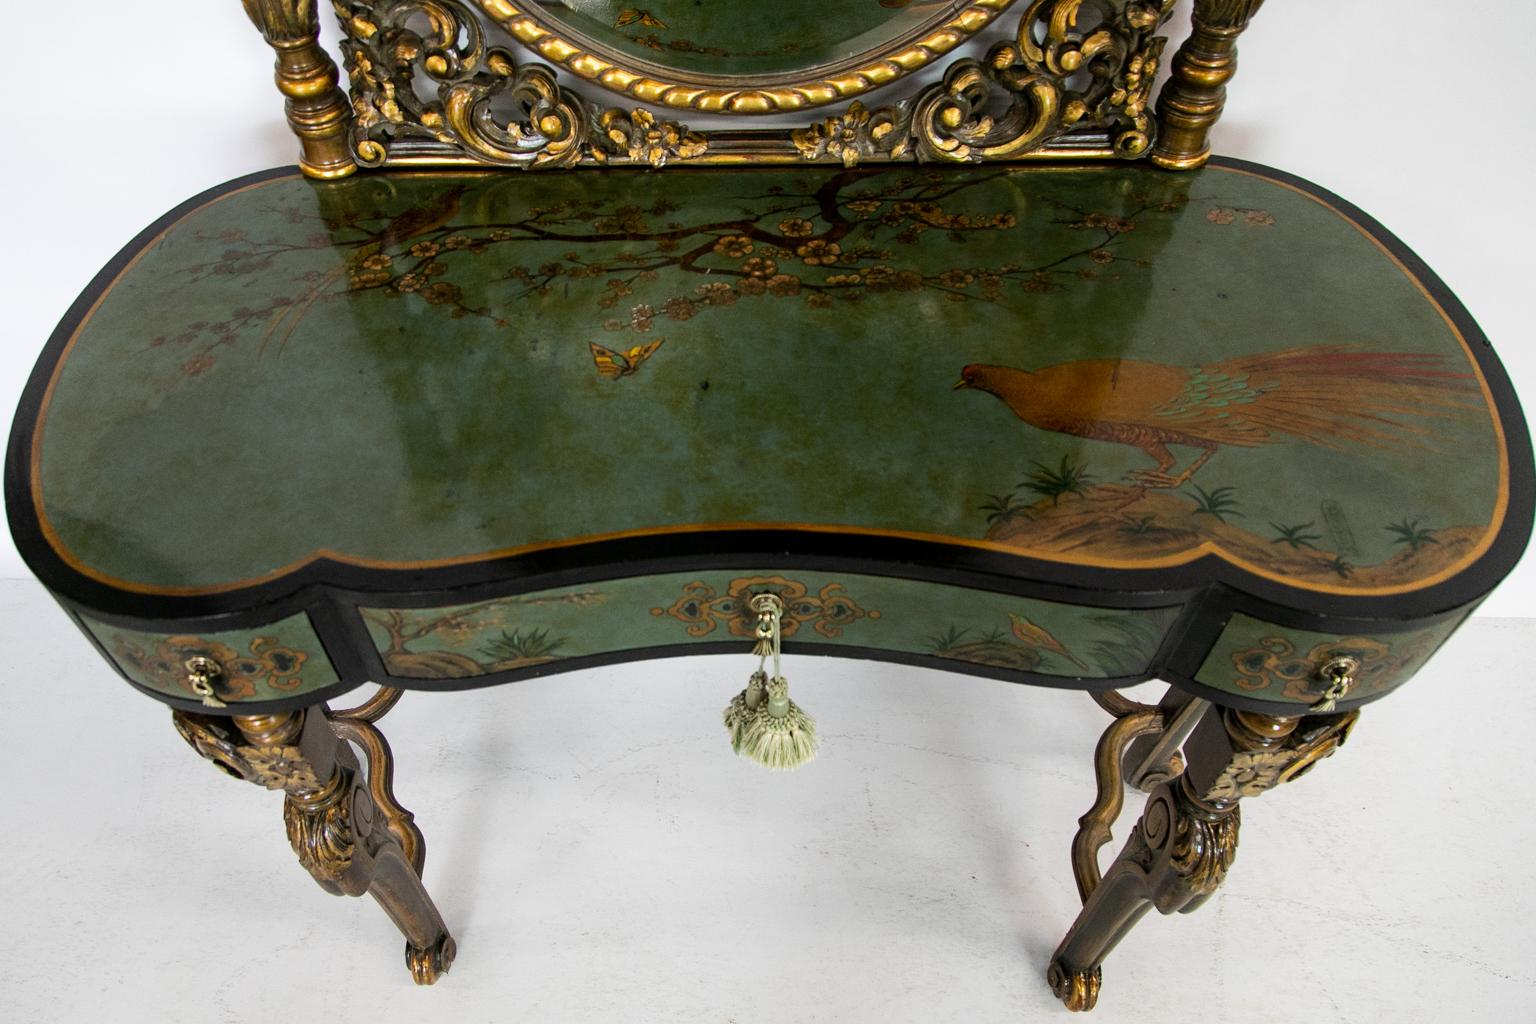 The top of this vanity has painted decoration in oriental designs of birds, butterflies, and floral branches. The mirror is beveled and framed in lavish carvings done in high relief.

Additional measurements:
Knee hole H 25 x W 28.